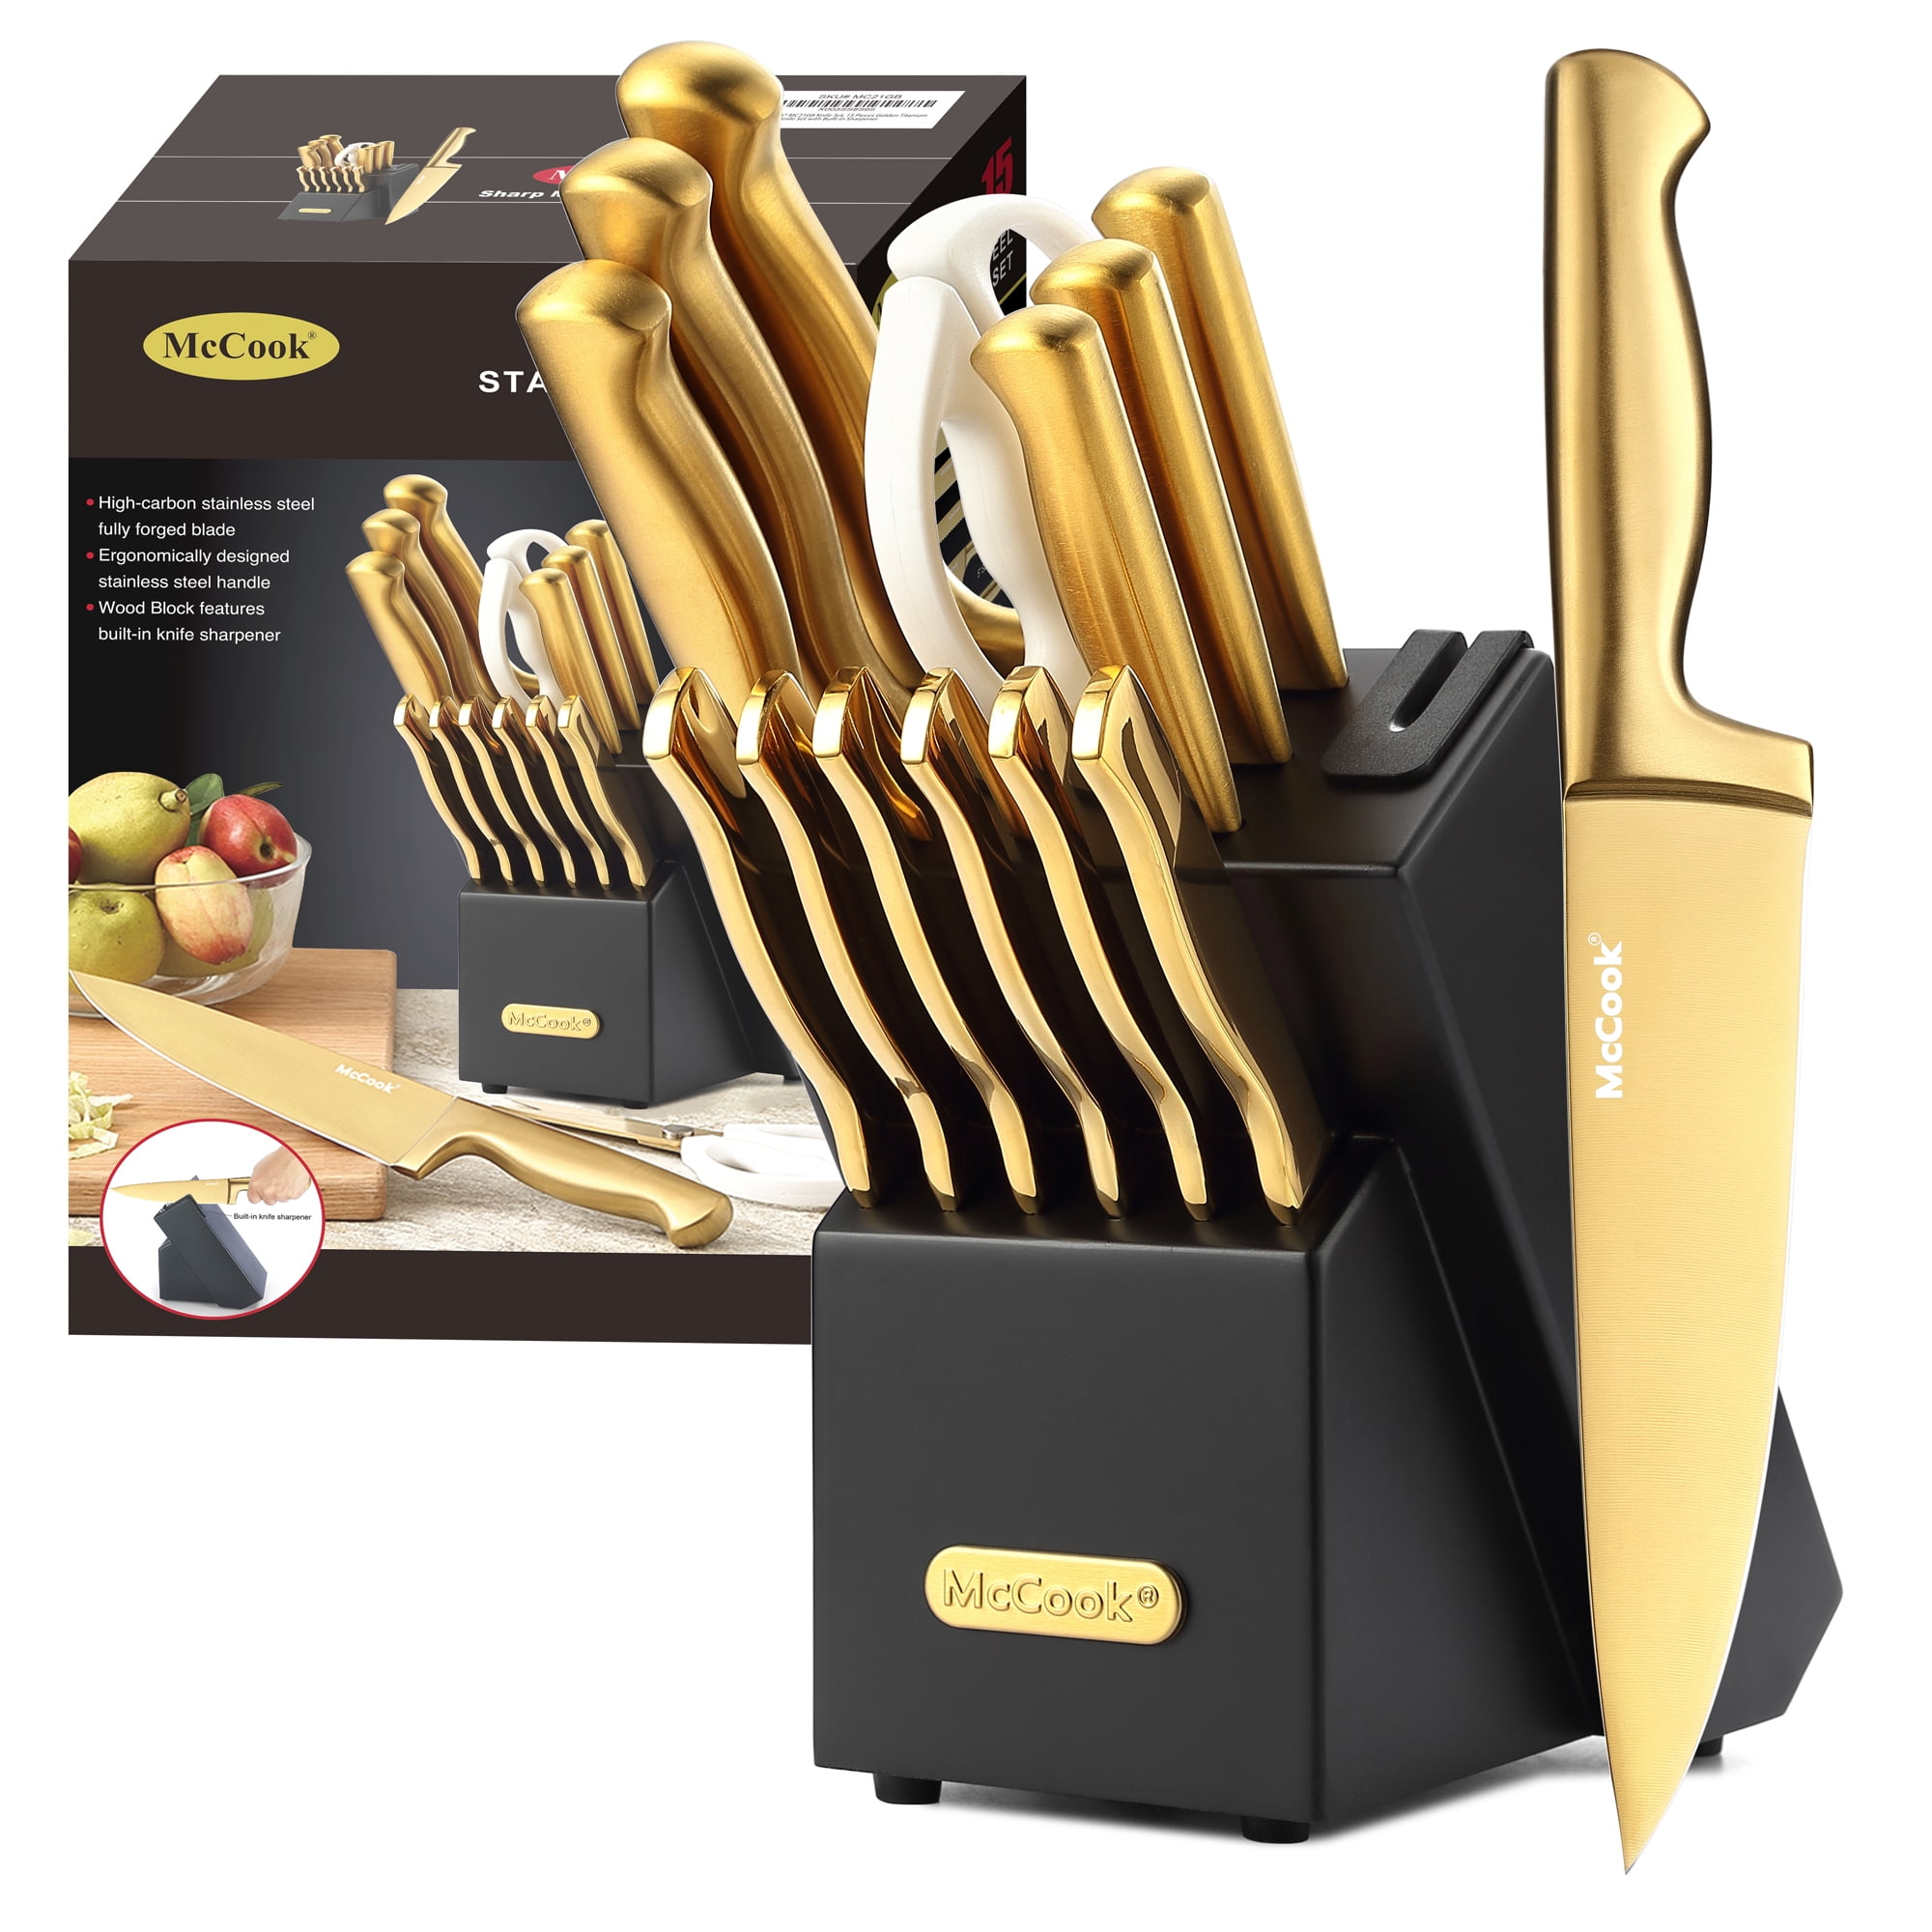 McCook® MC25A Knife Sets,15 Pieces German Stainless Steel Kitchen Knife  Block Set with Built-in Sharpener - Coupon Codes, Promo Codes, Daily Deals,  Save Money Today